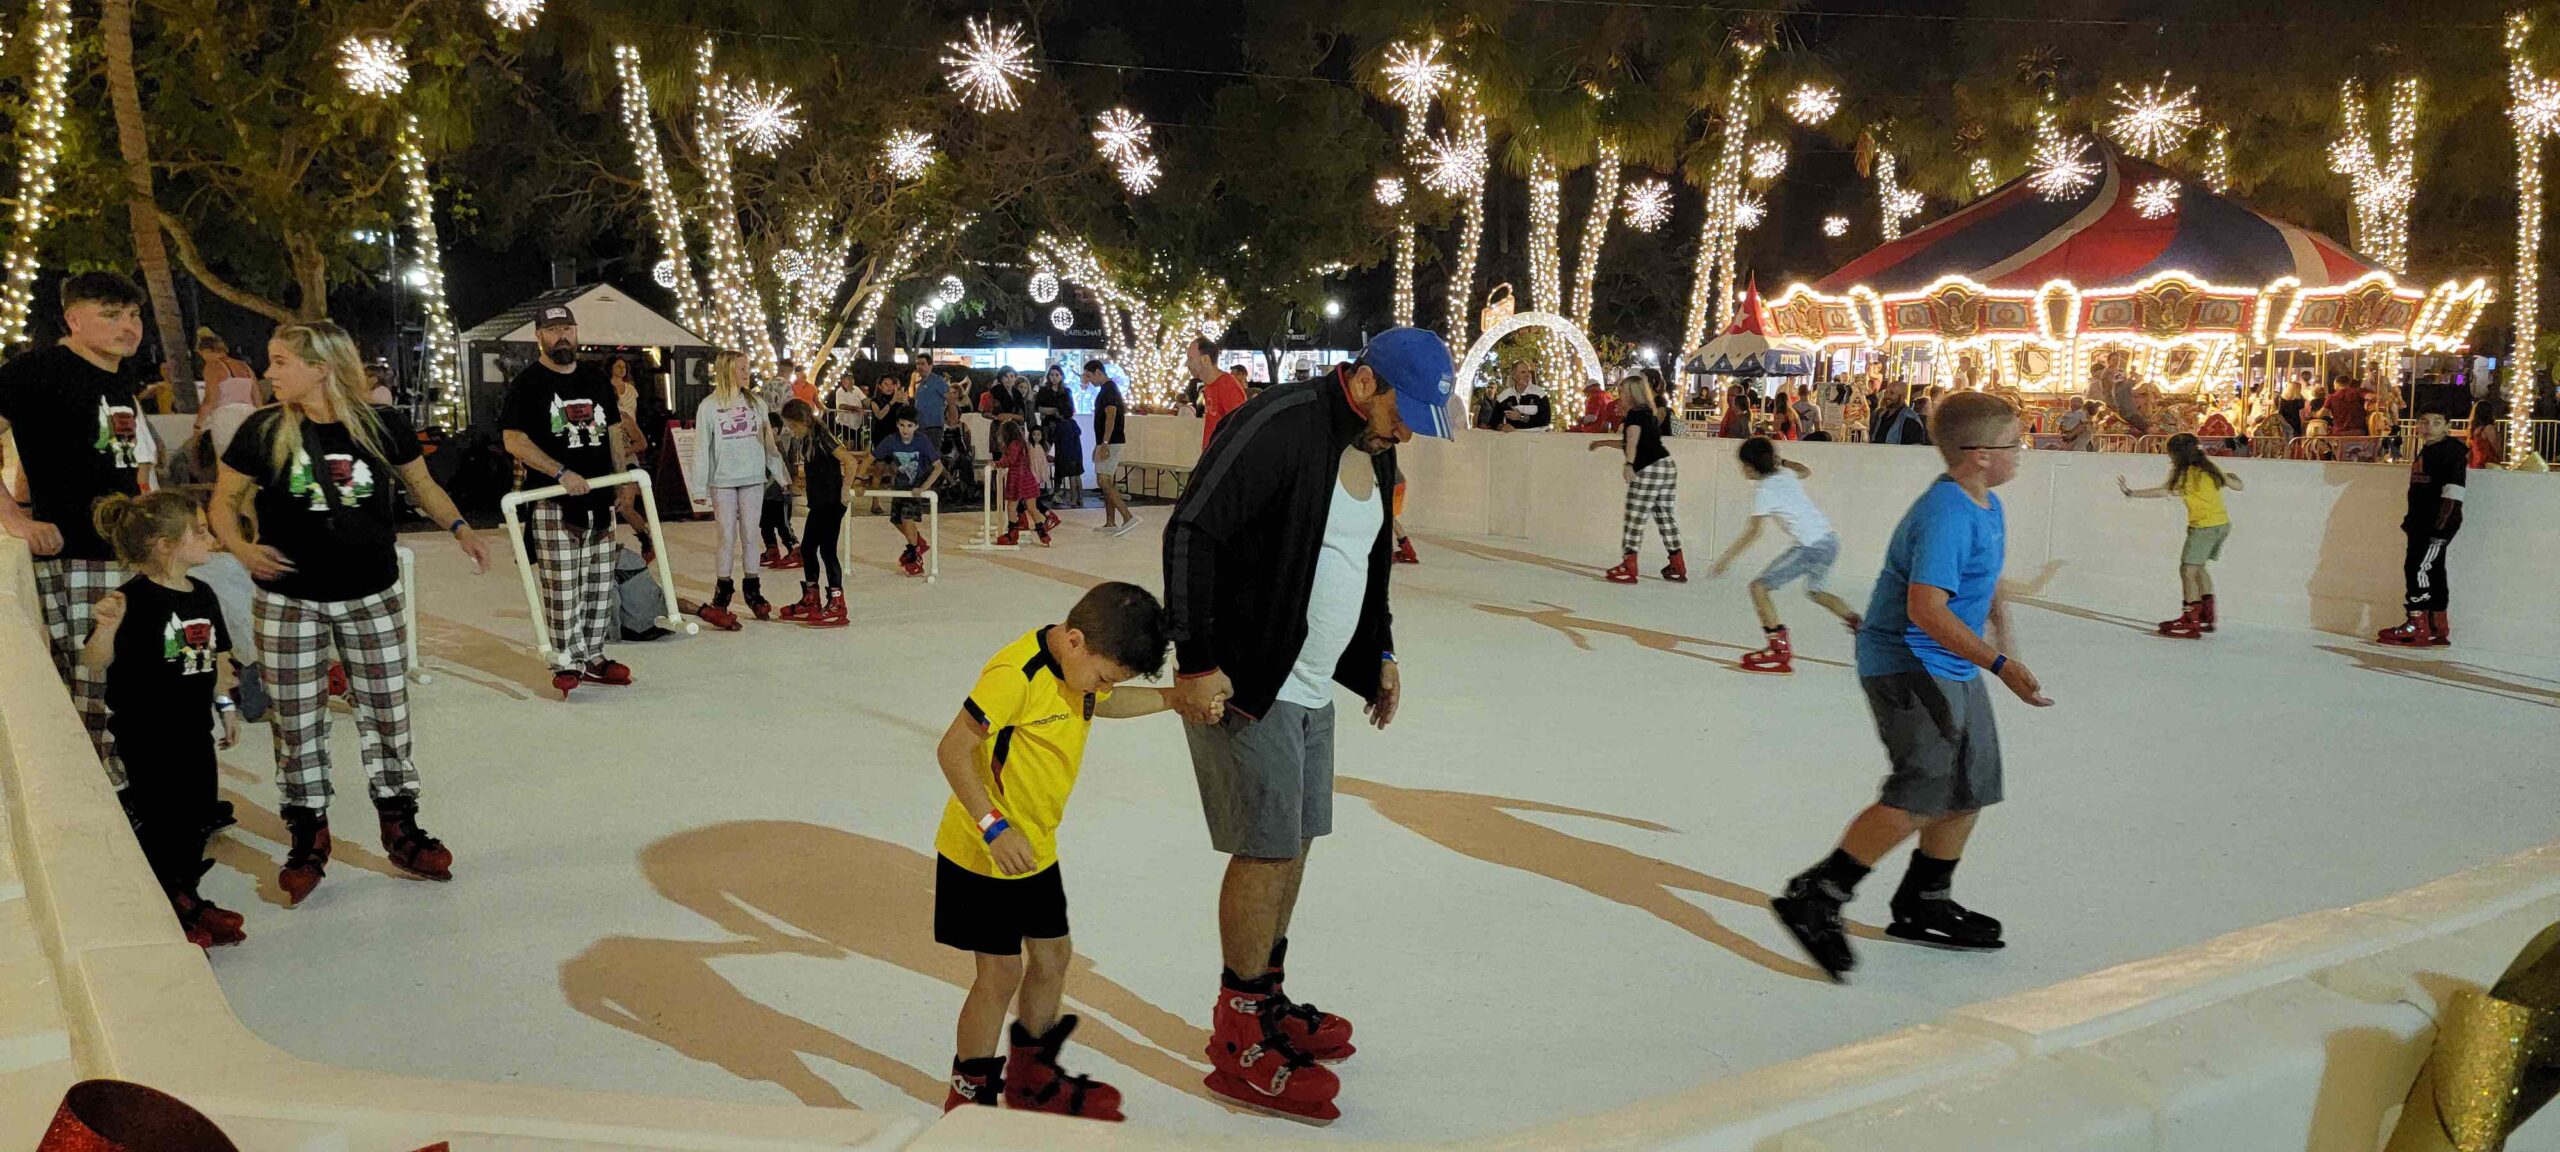 Global synthetic ice skating rink at Winter Spectacular on St. Armands Circle